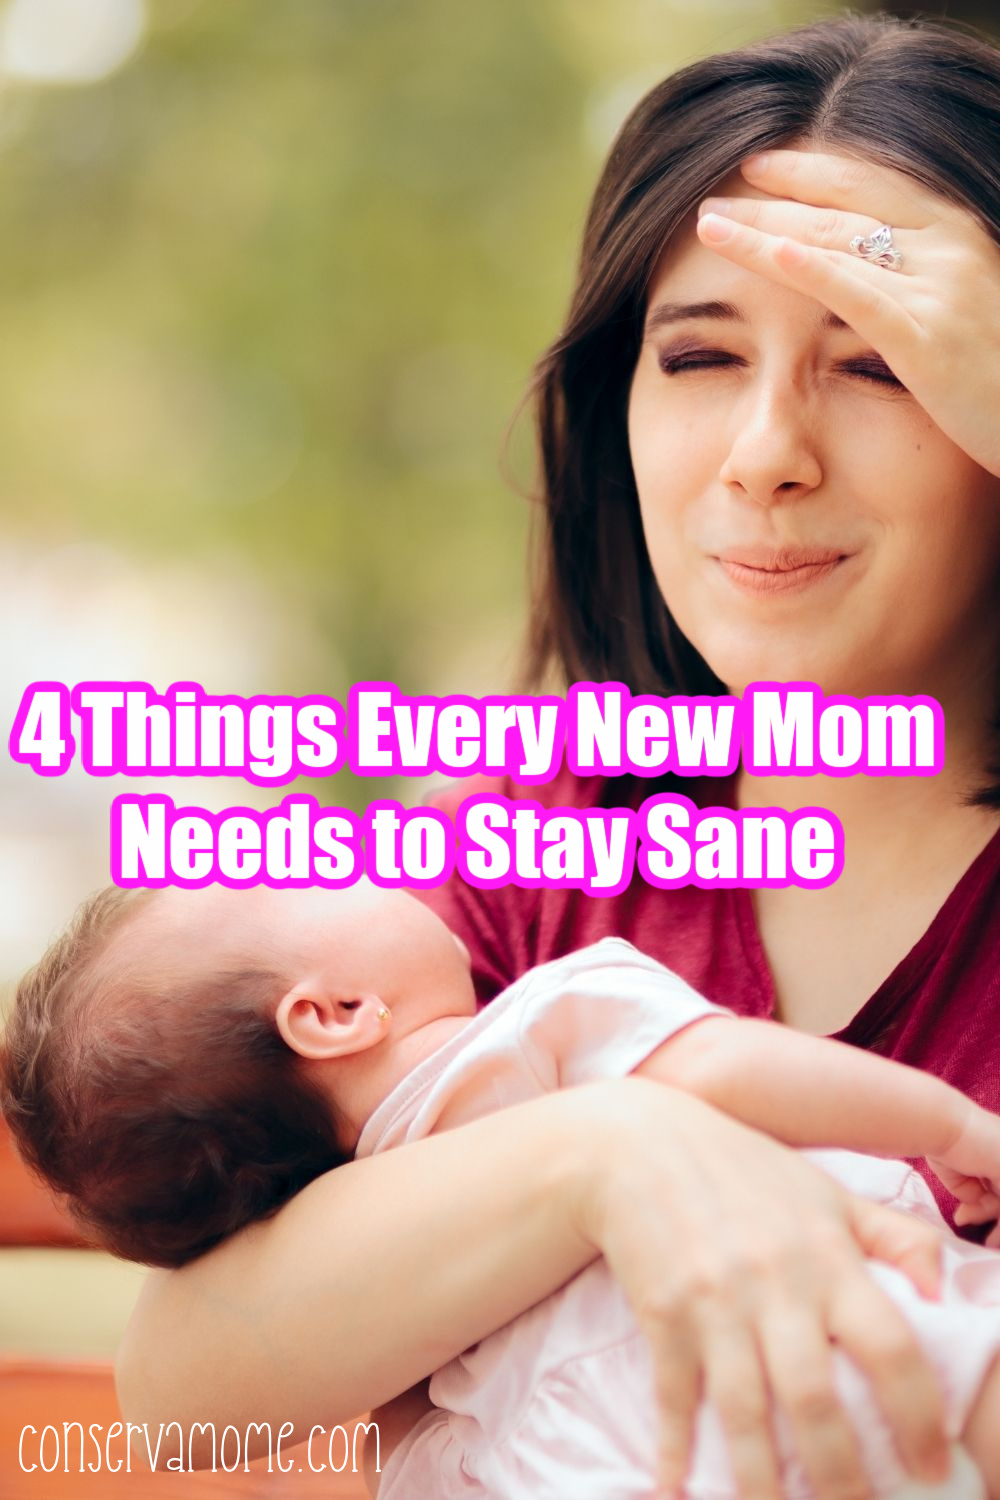 4 Things Every New Mom Needs to Stay Sane